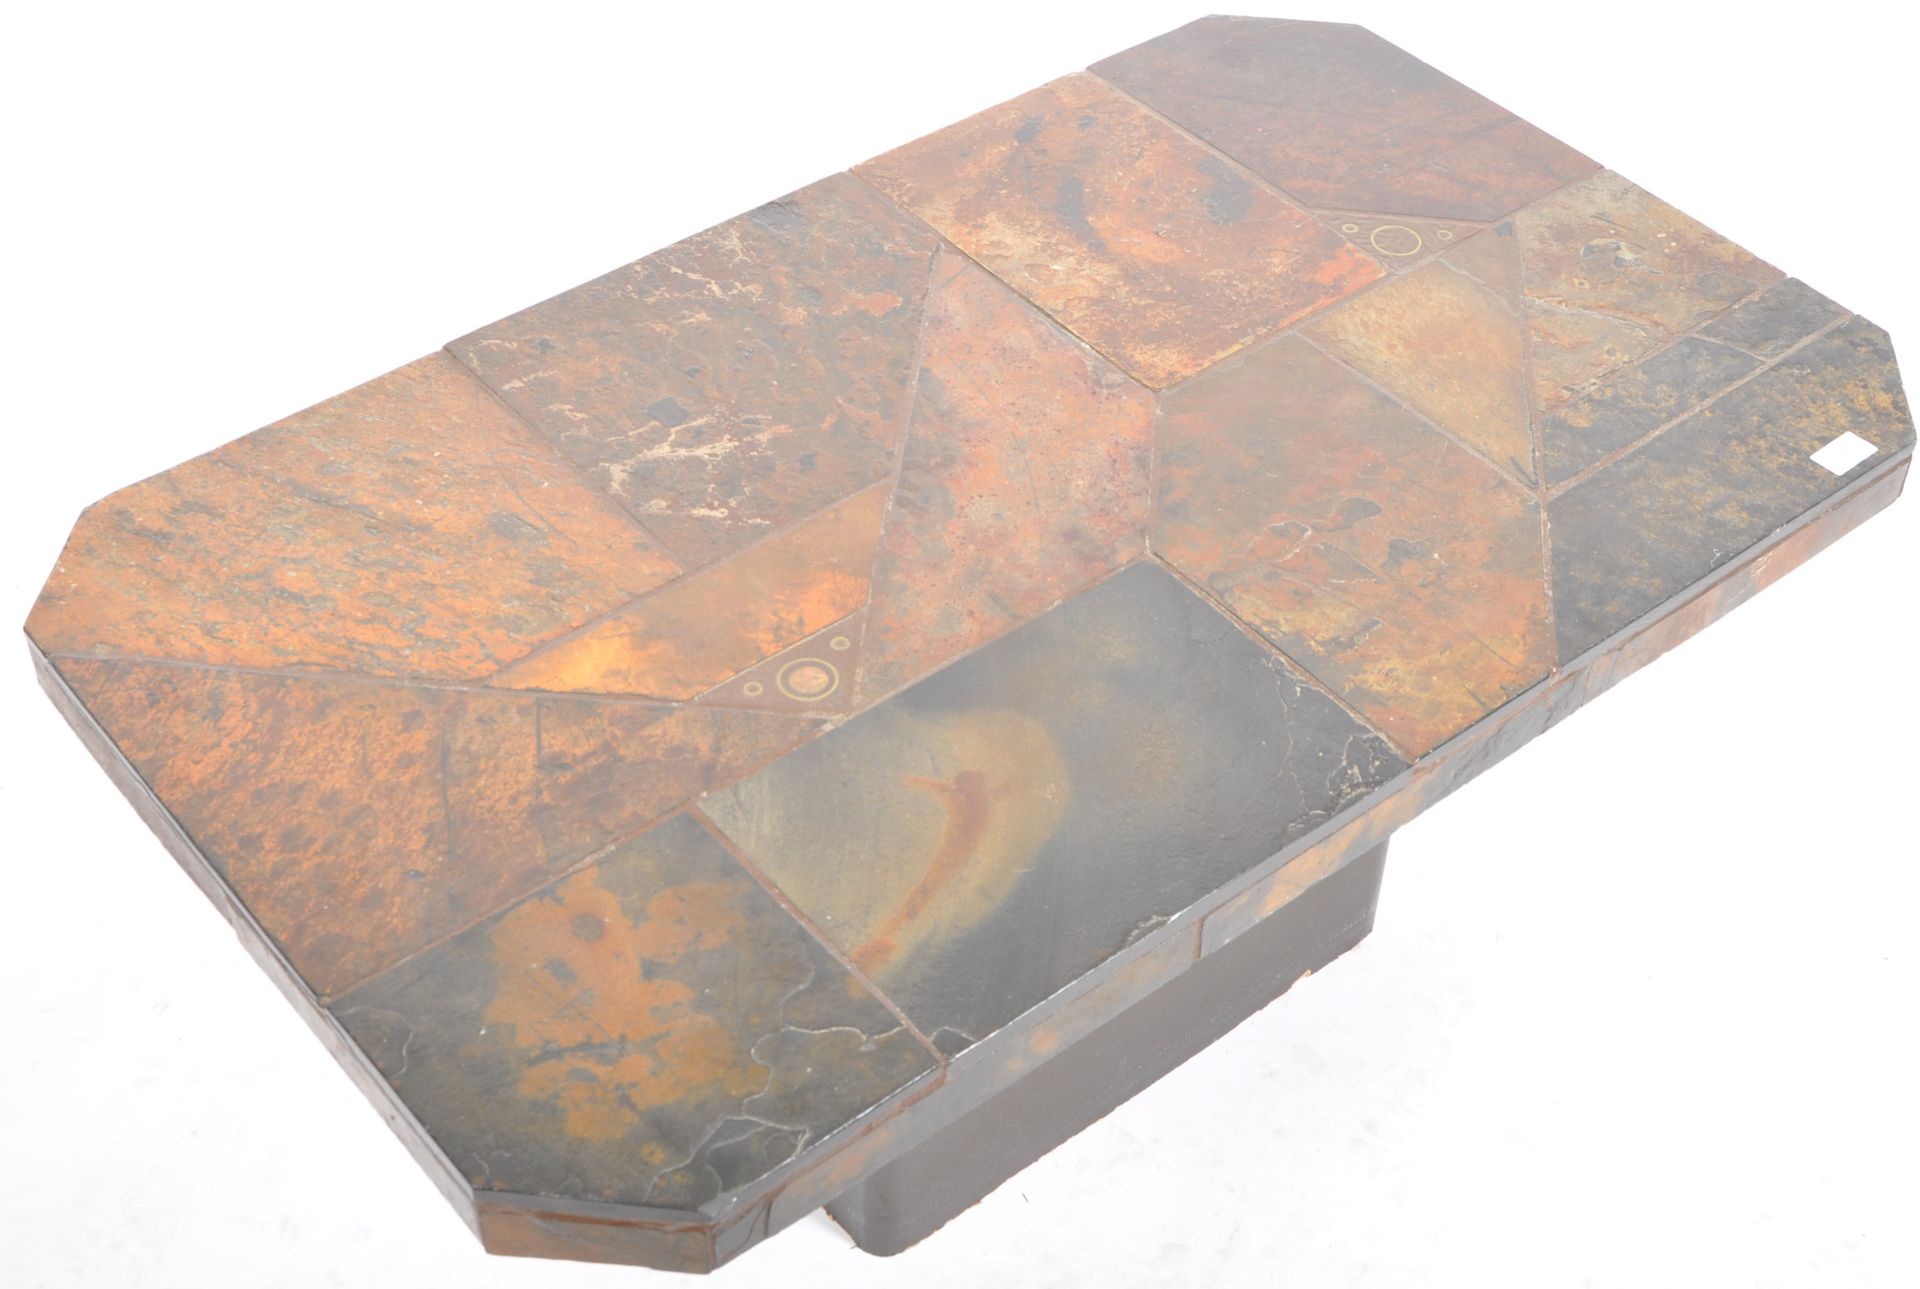 ATTRIBUTED TO PAUL KINGMA - TABLEAUX - SLATE COFFEE TABLE - Image 2 of 4